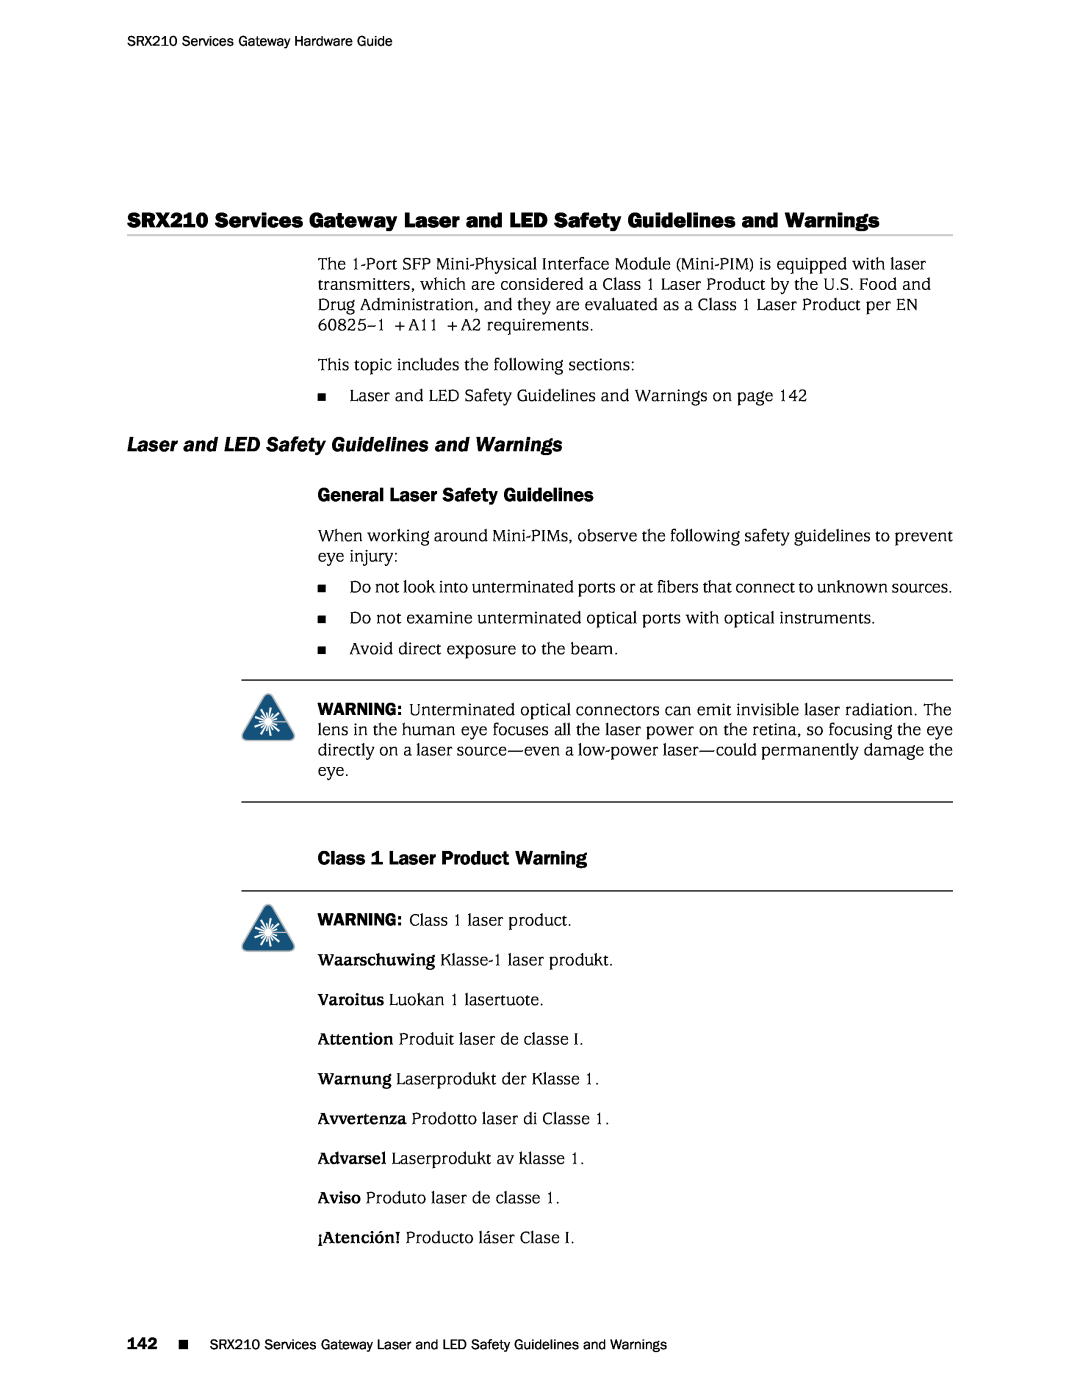 Juniper Networks SRX 210 manual SRX210 Services Gateway Laser and LED Safety Guidelines and Warnings 